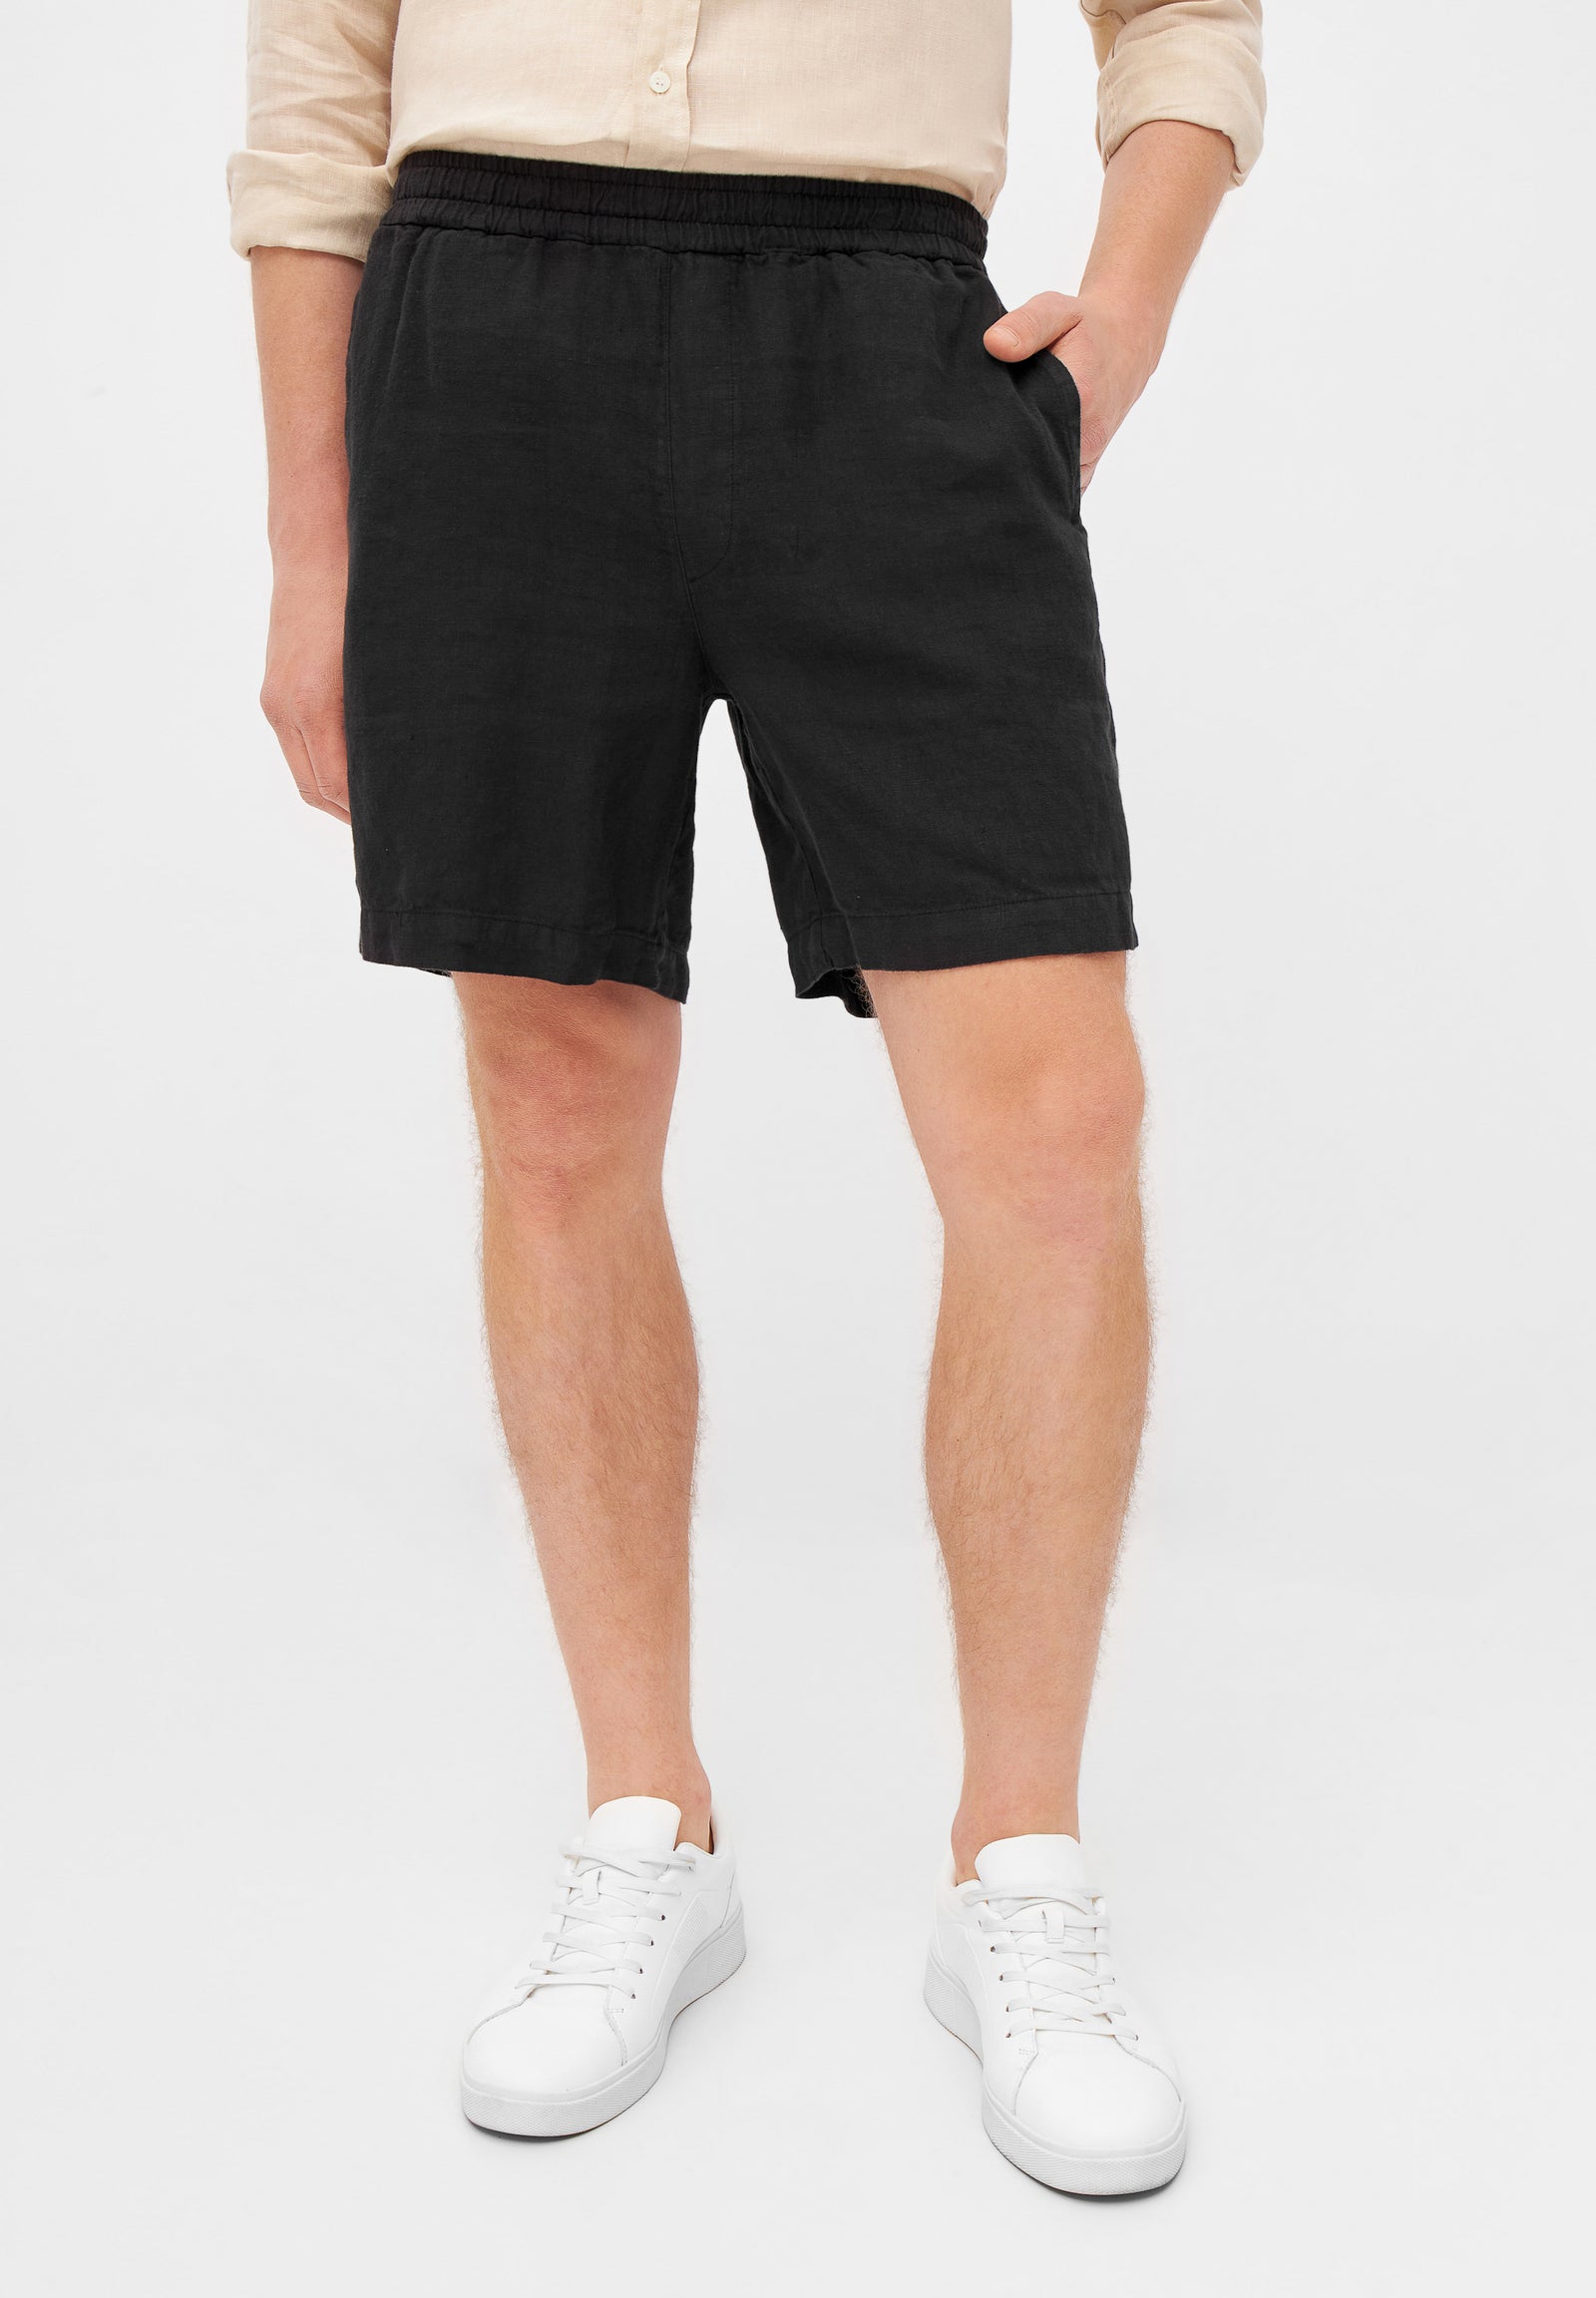 Shorts Modell: Laurin